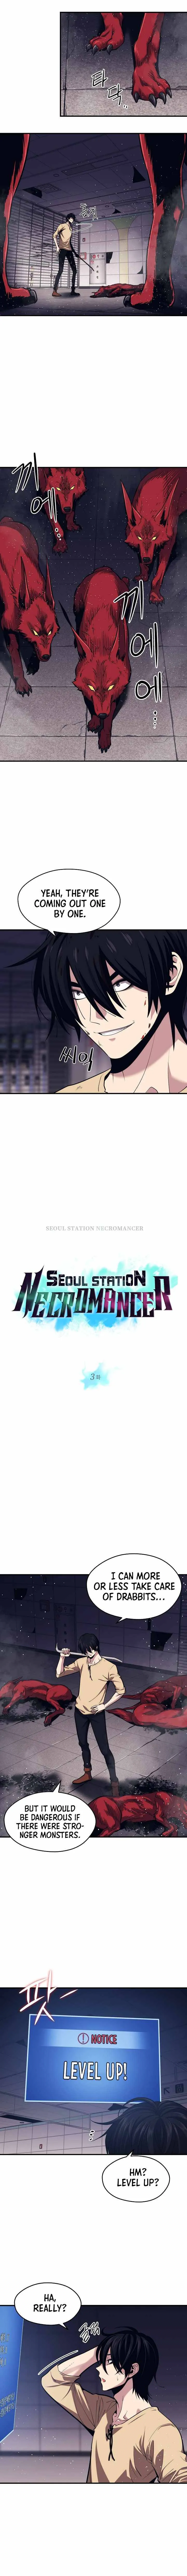 Seoul Station’s Necromancer Chapter 3 page 2